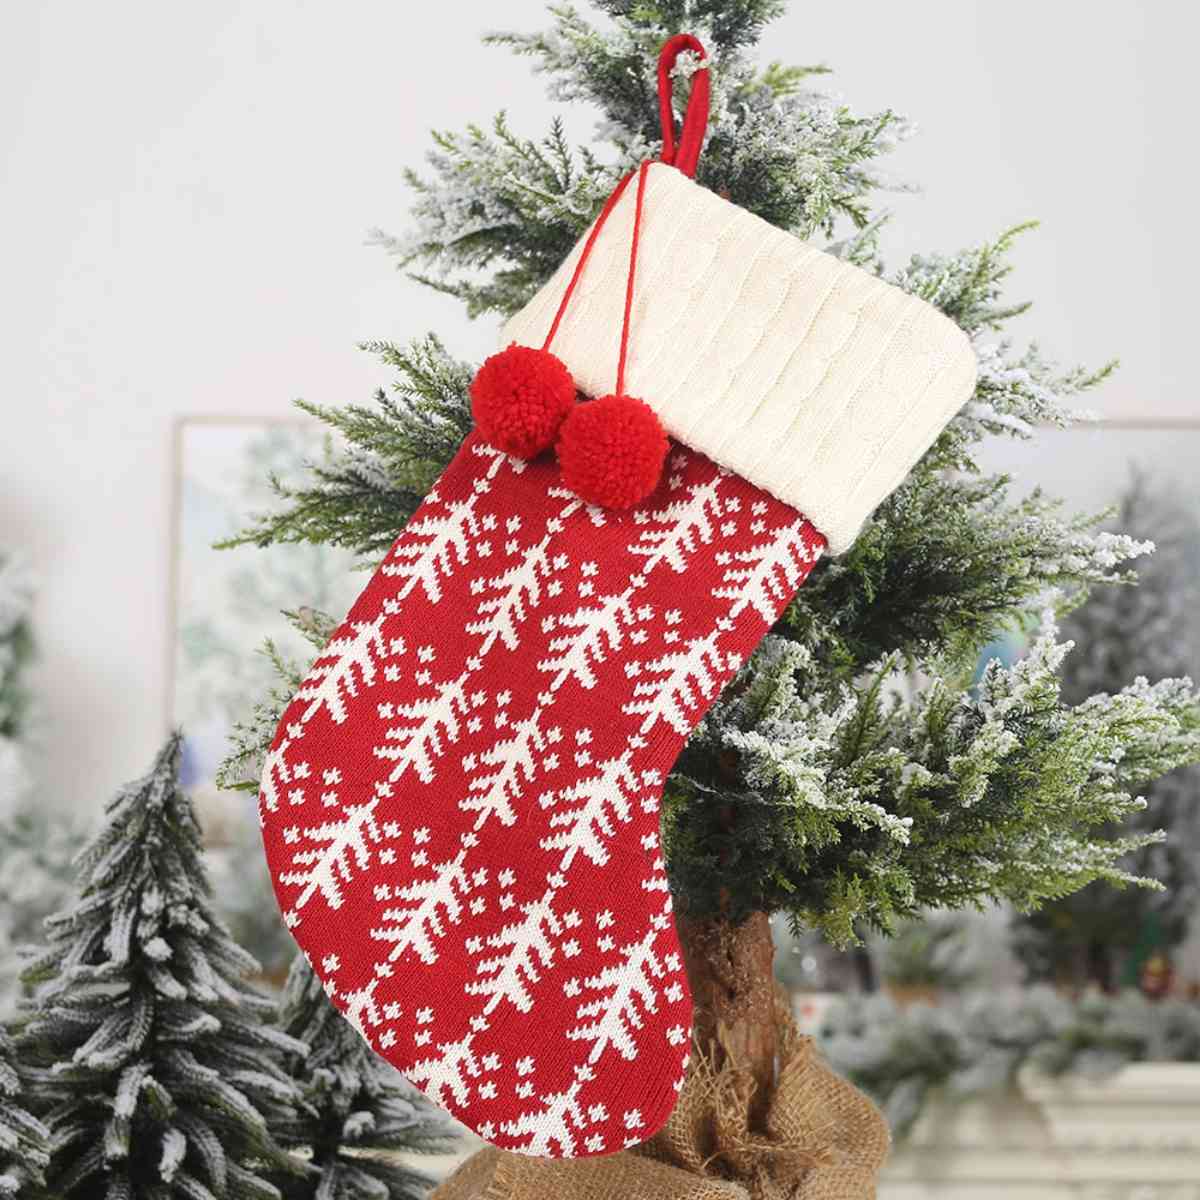 Christmas Stocking Hanging Widget in Assorted Styles 16.1" H x 7.5" W